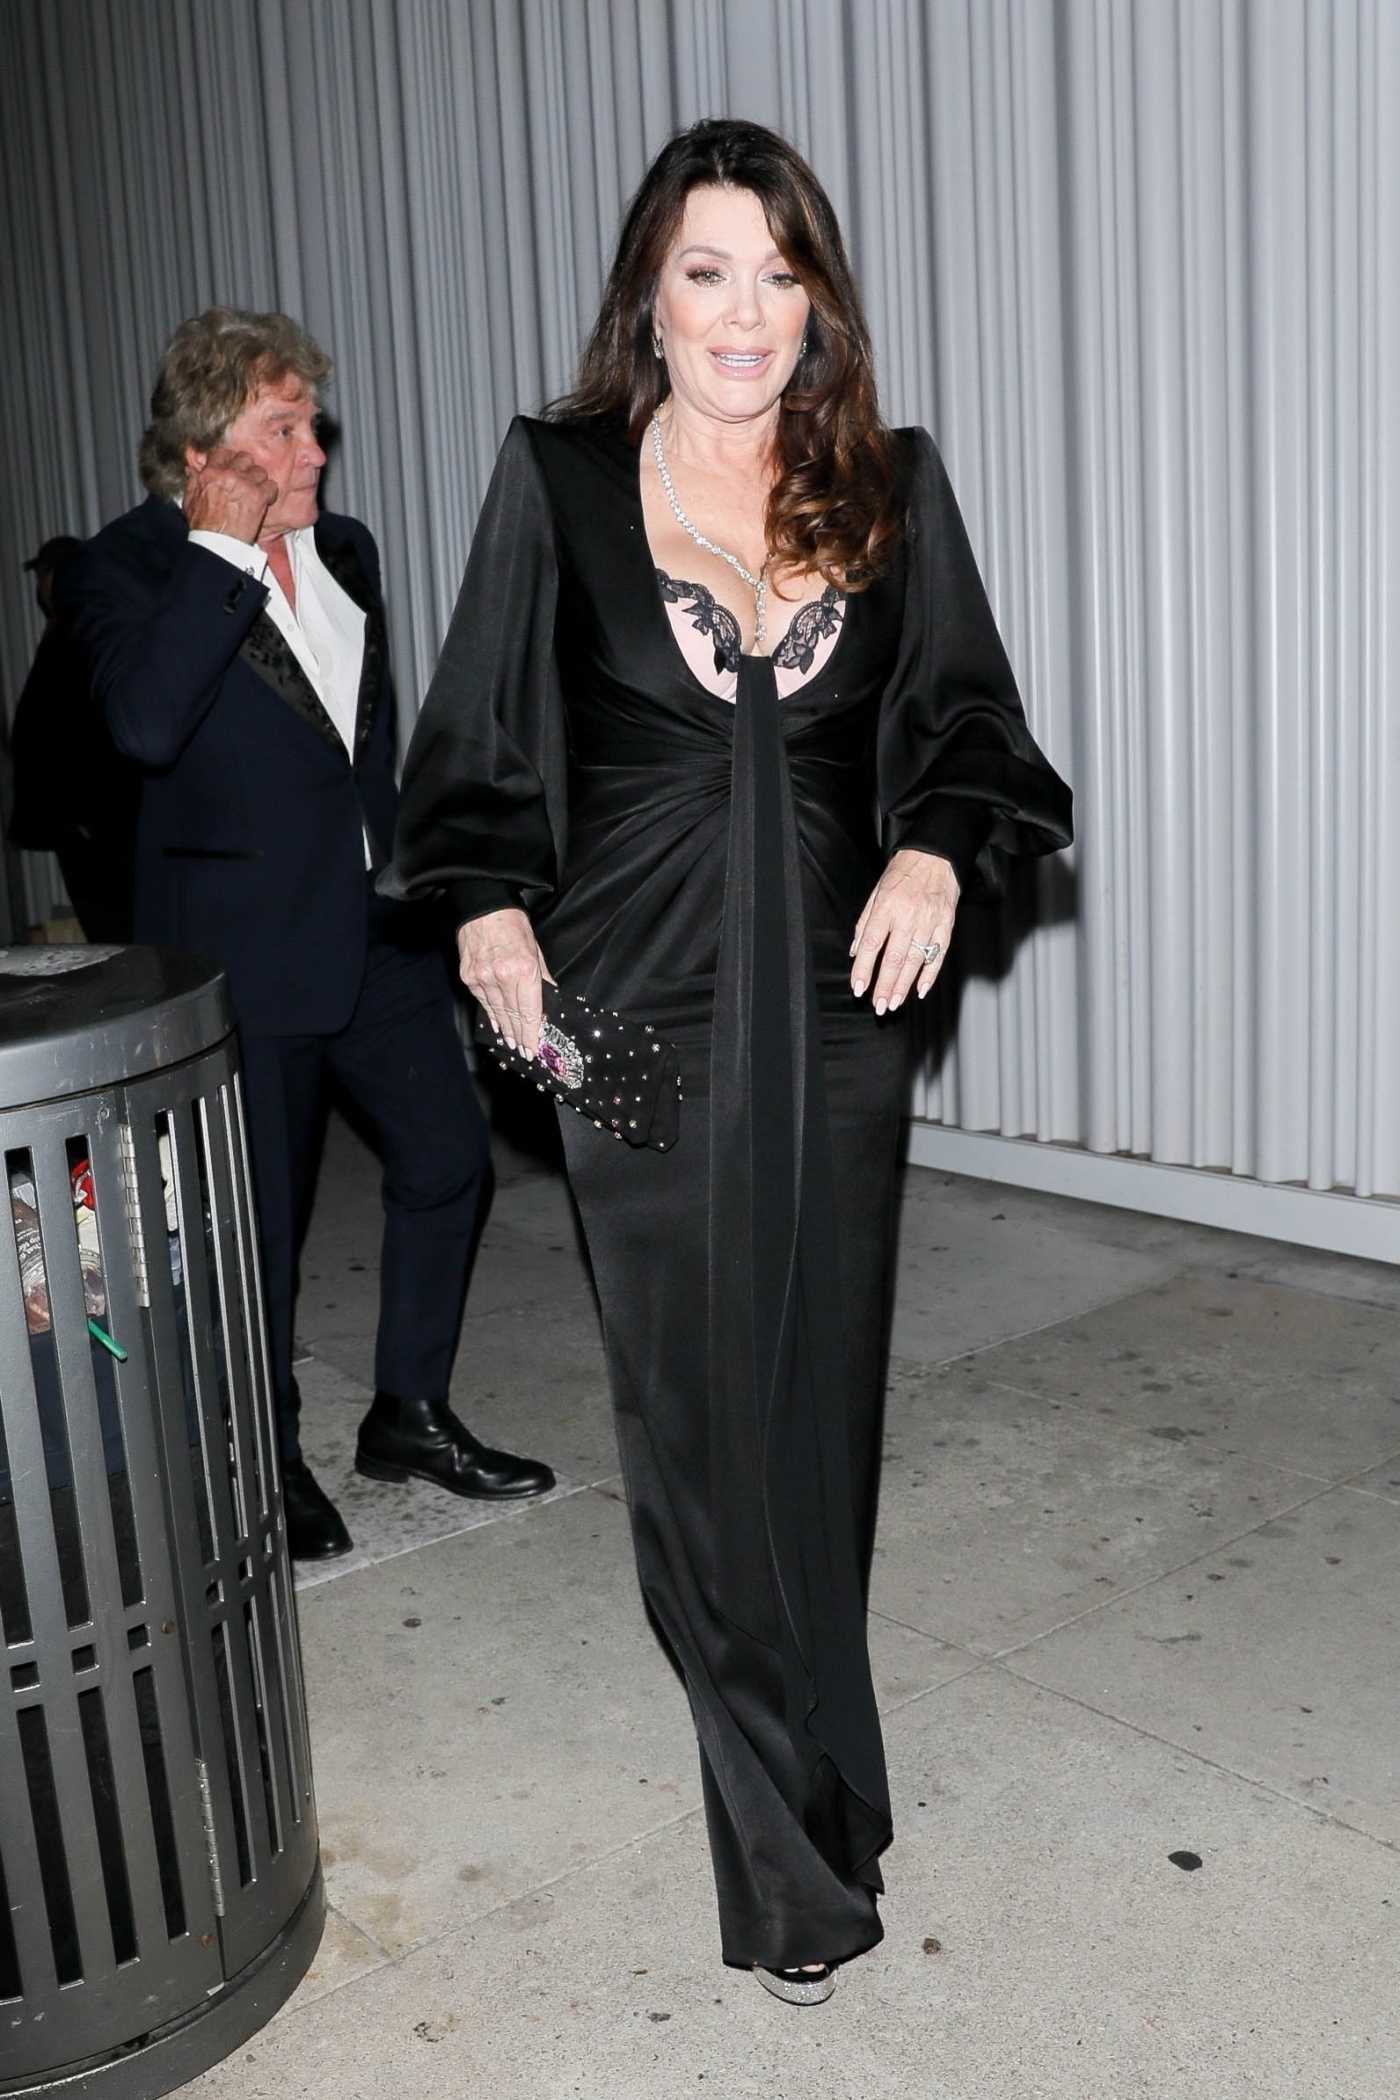 Lisa Vanderpump in a Black Dress Leaves a Birthday Celebration with Her Husband Ken Todd at Mr Chow in Beverly Hills 05/29/2021